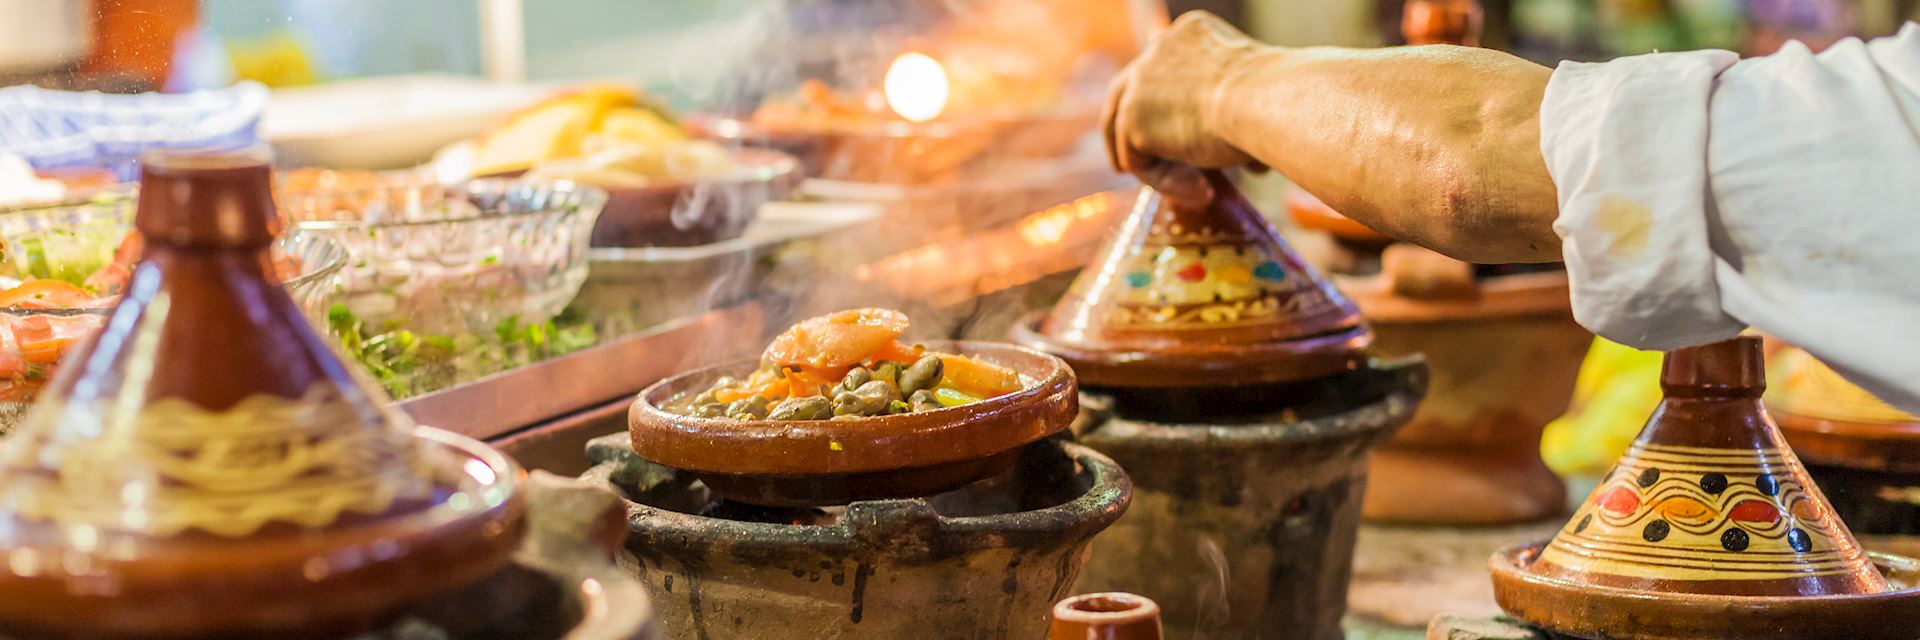 Traditional casserole dishes from Morocco